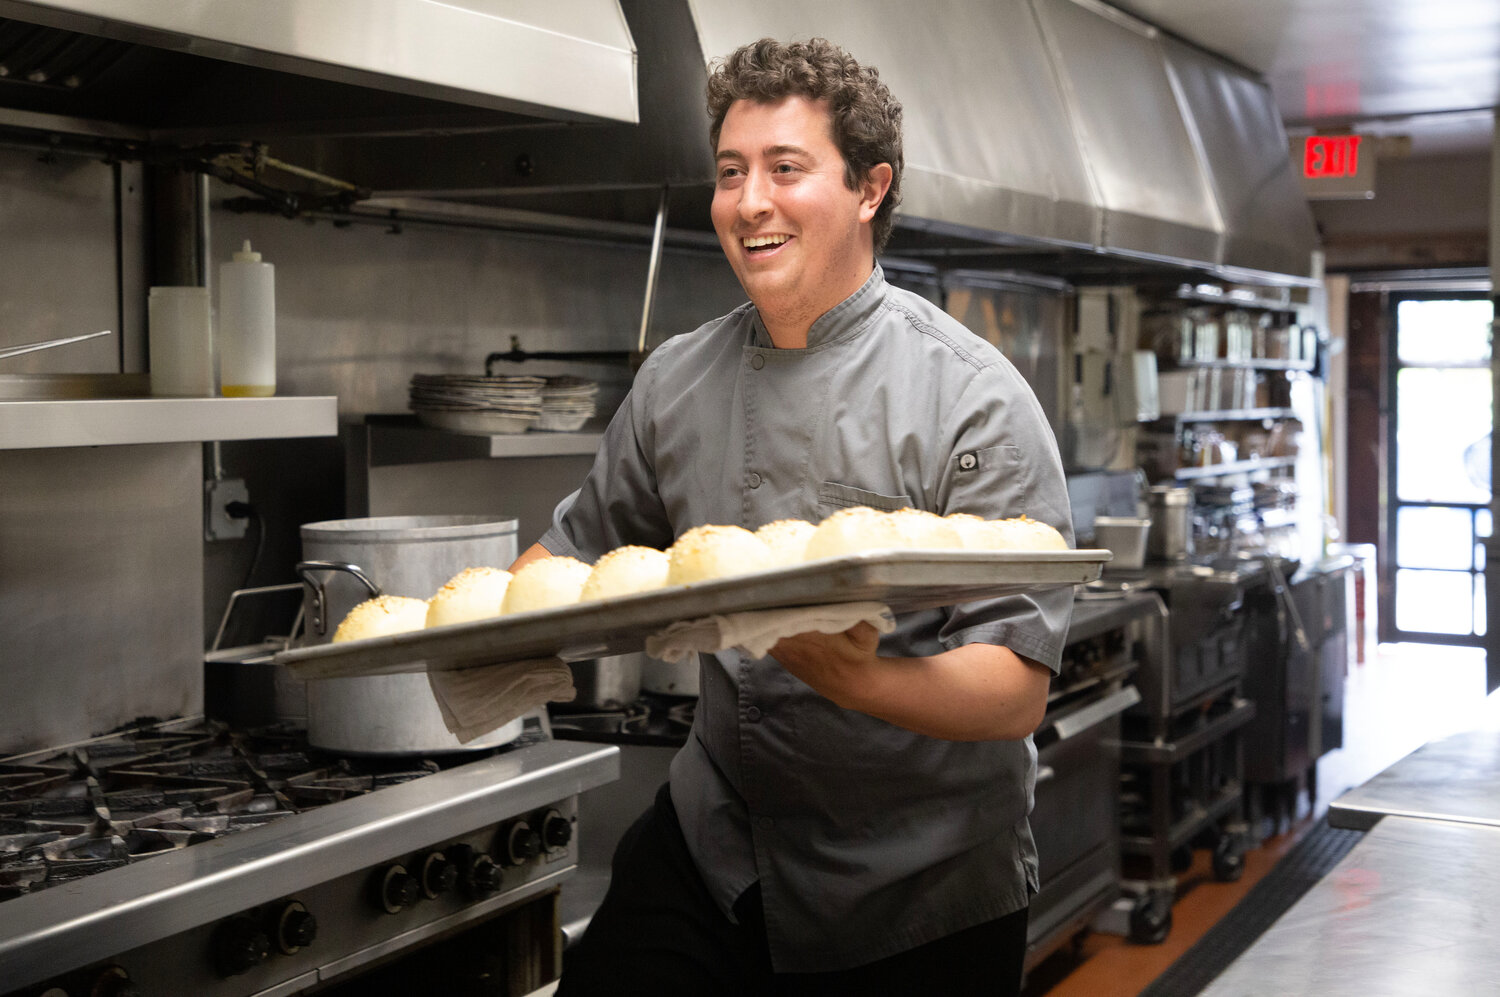 According to father Steve, Nic has really upped the bread game at the restaurant in the past few years, making all their baked goods and pastas from scratch.